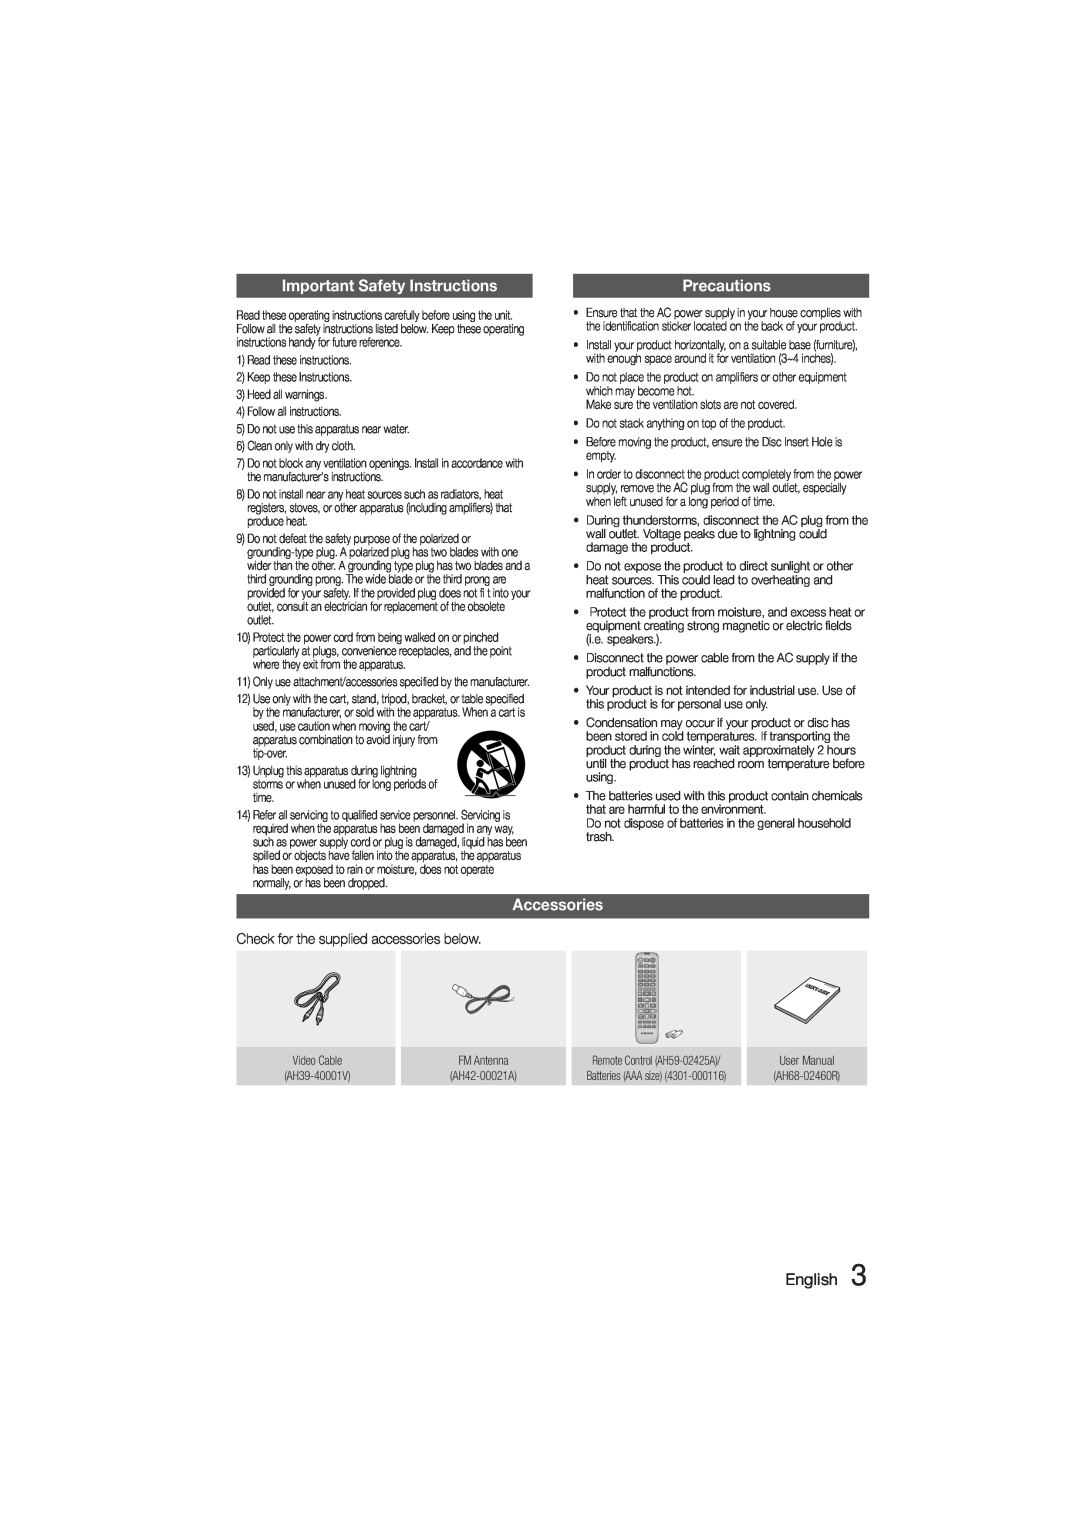 Samsung HT-355, HT-E350 user manual Important Safety Instructions, Precautions, Accessories, English 